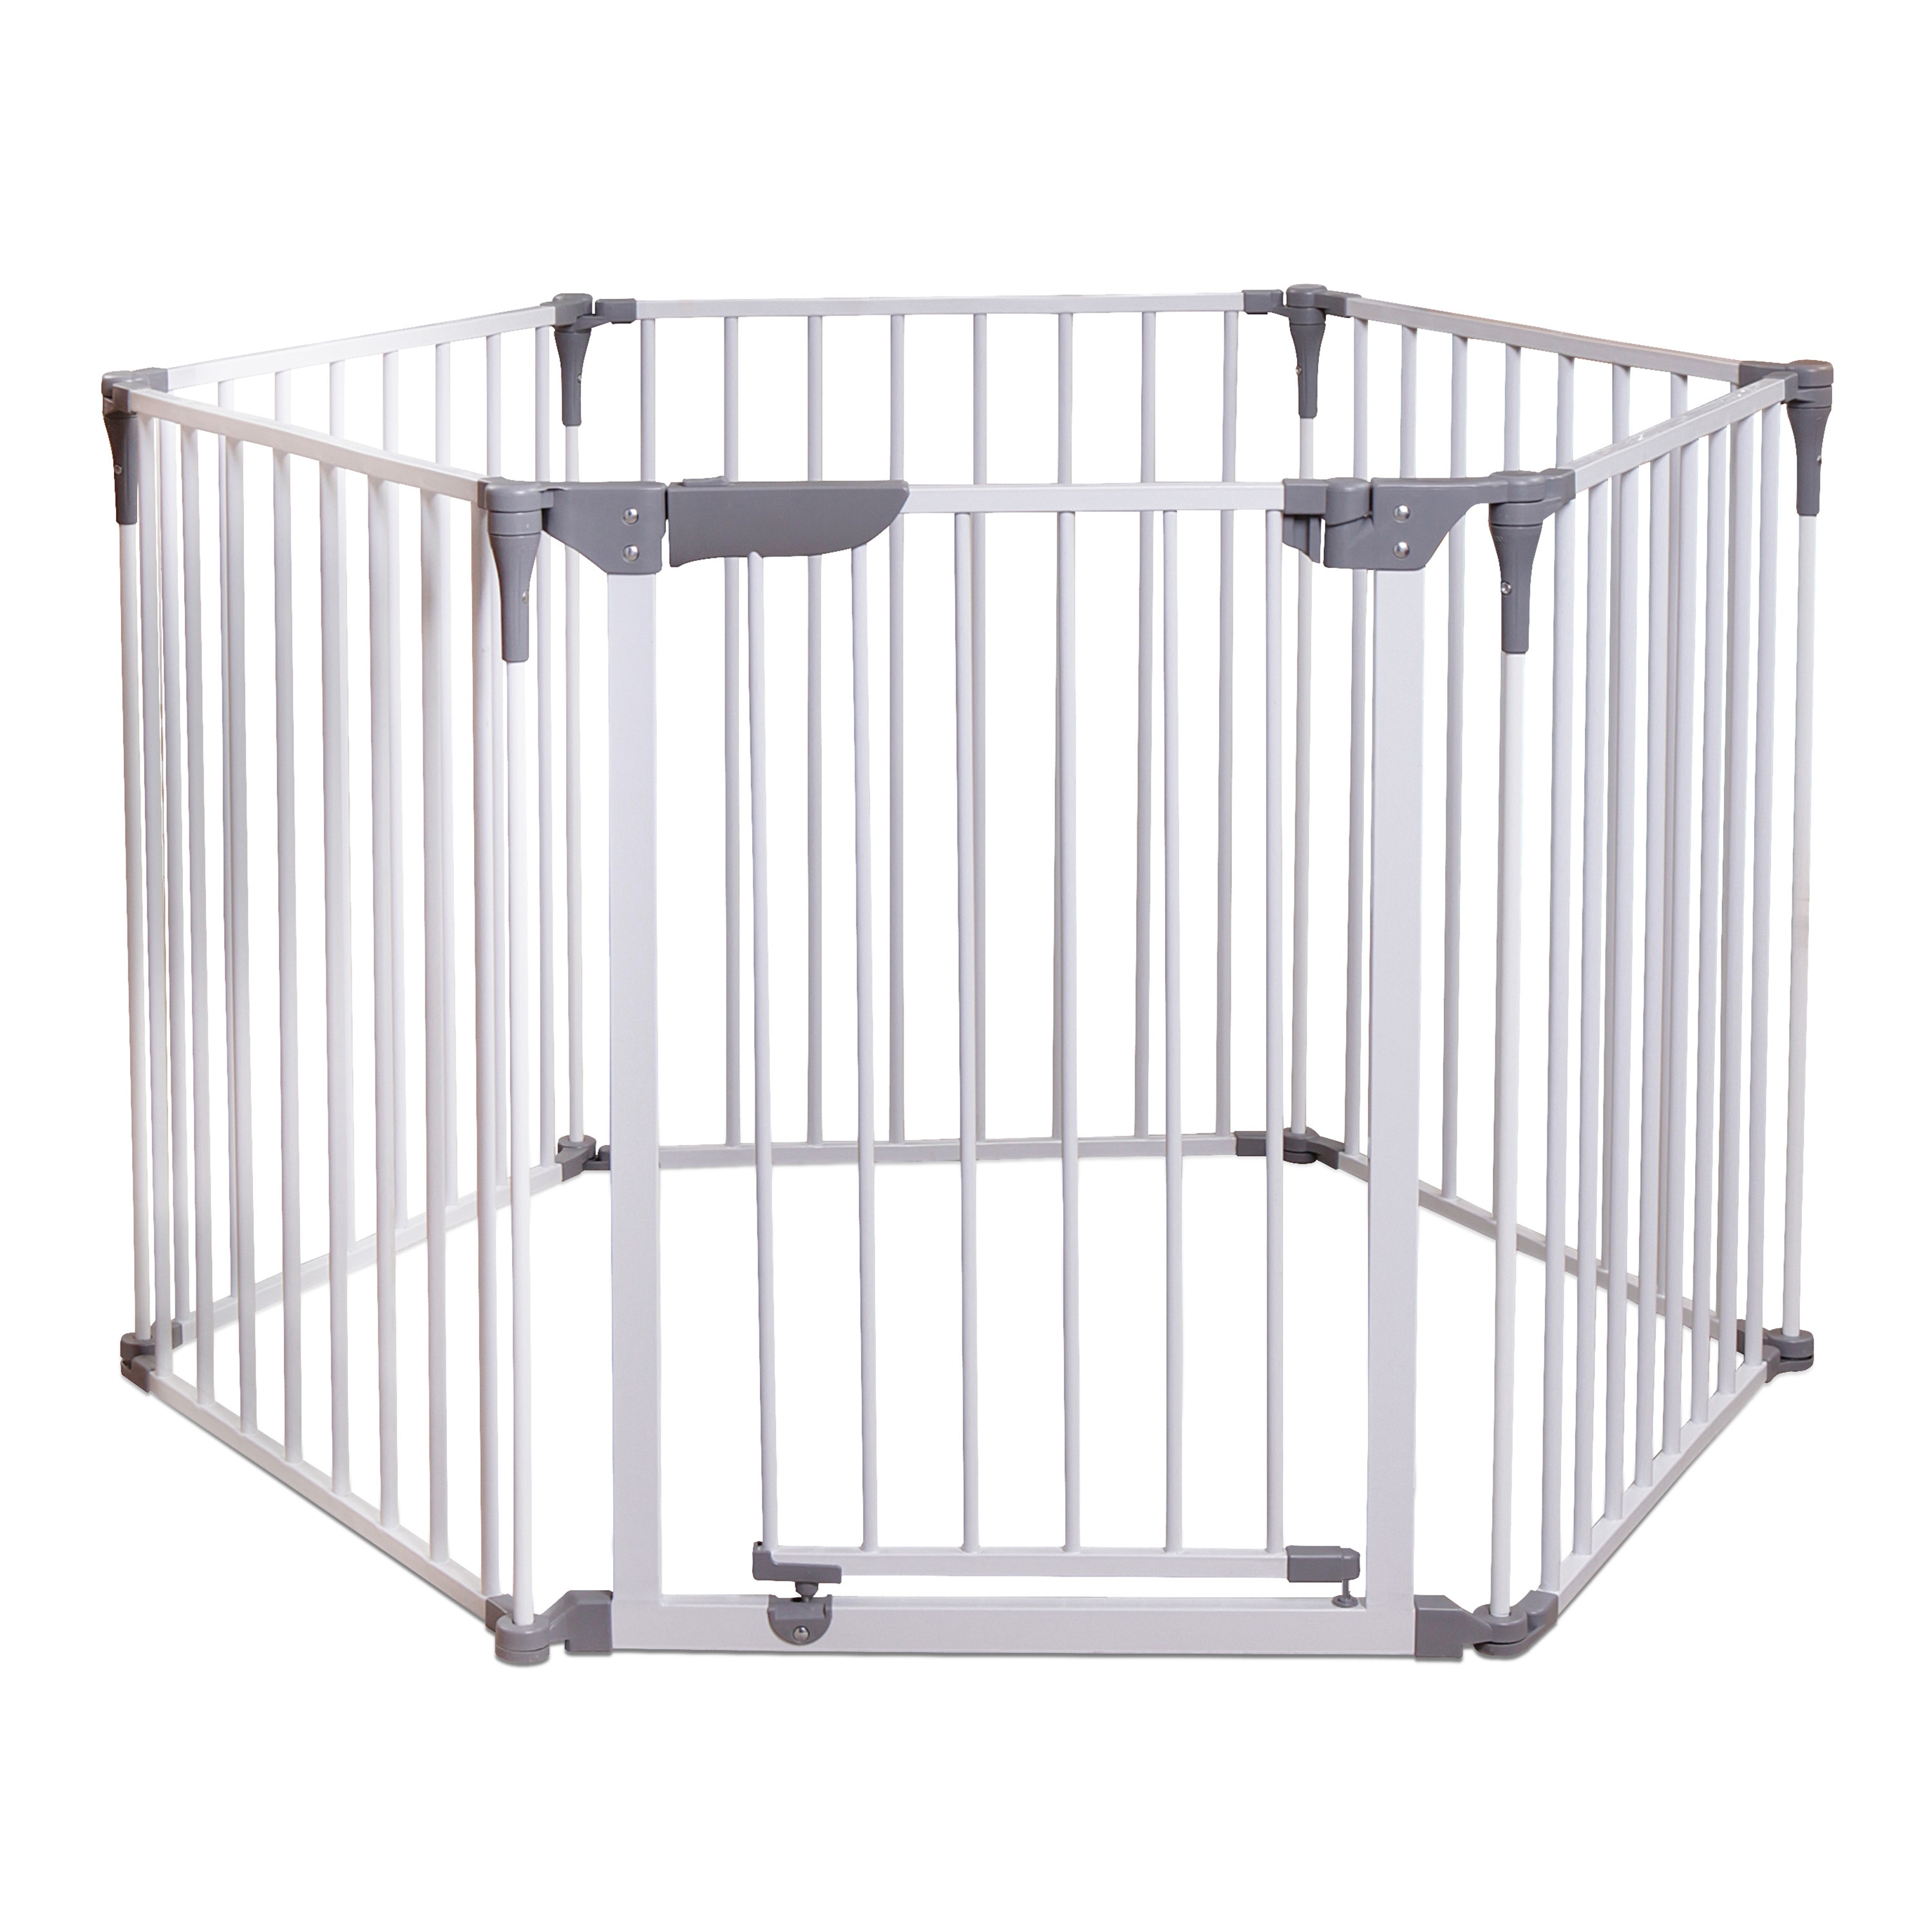 Royale Converta 151-in x 29-in Hardware Mounted White Metal Safety Play Yard with Gate | - Dreambaby L849